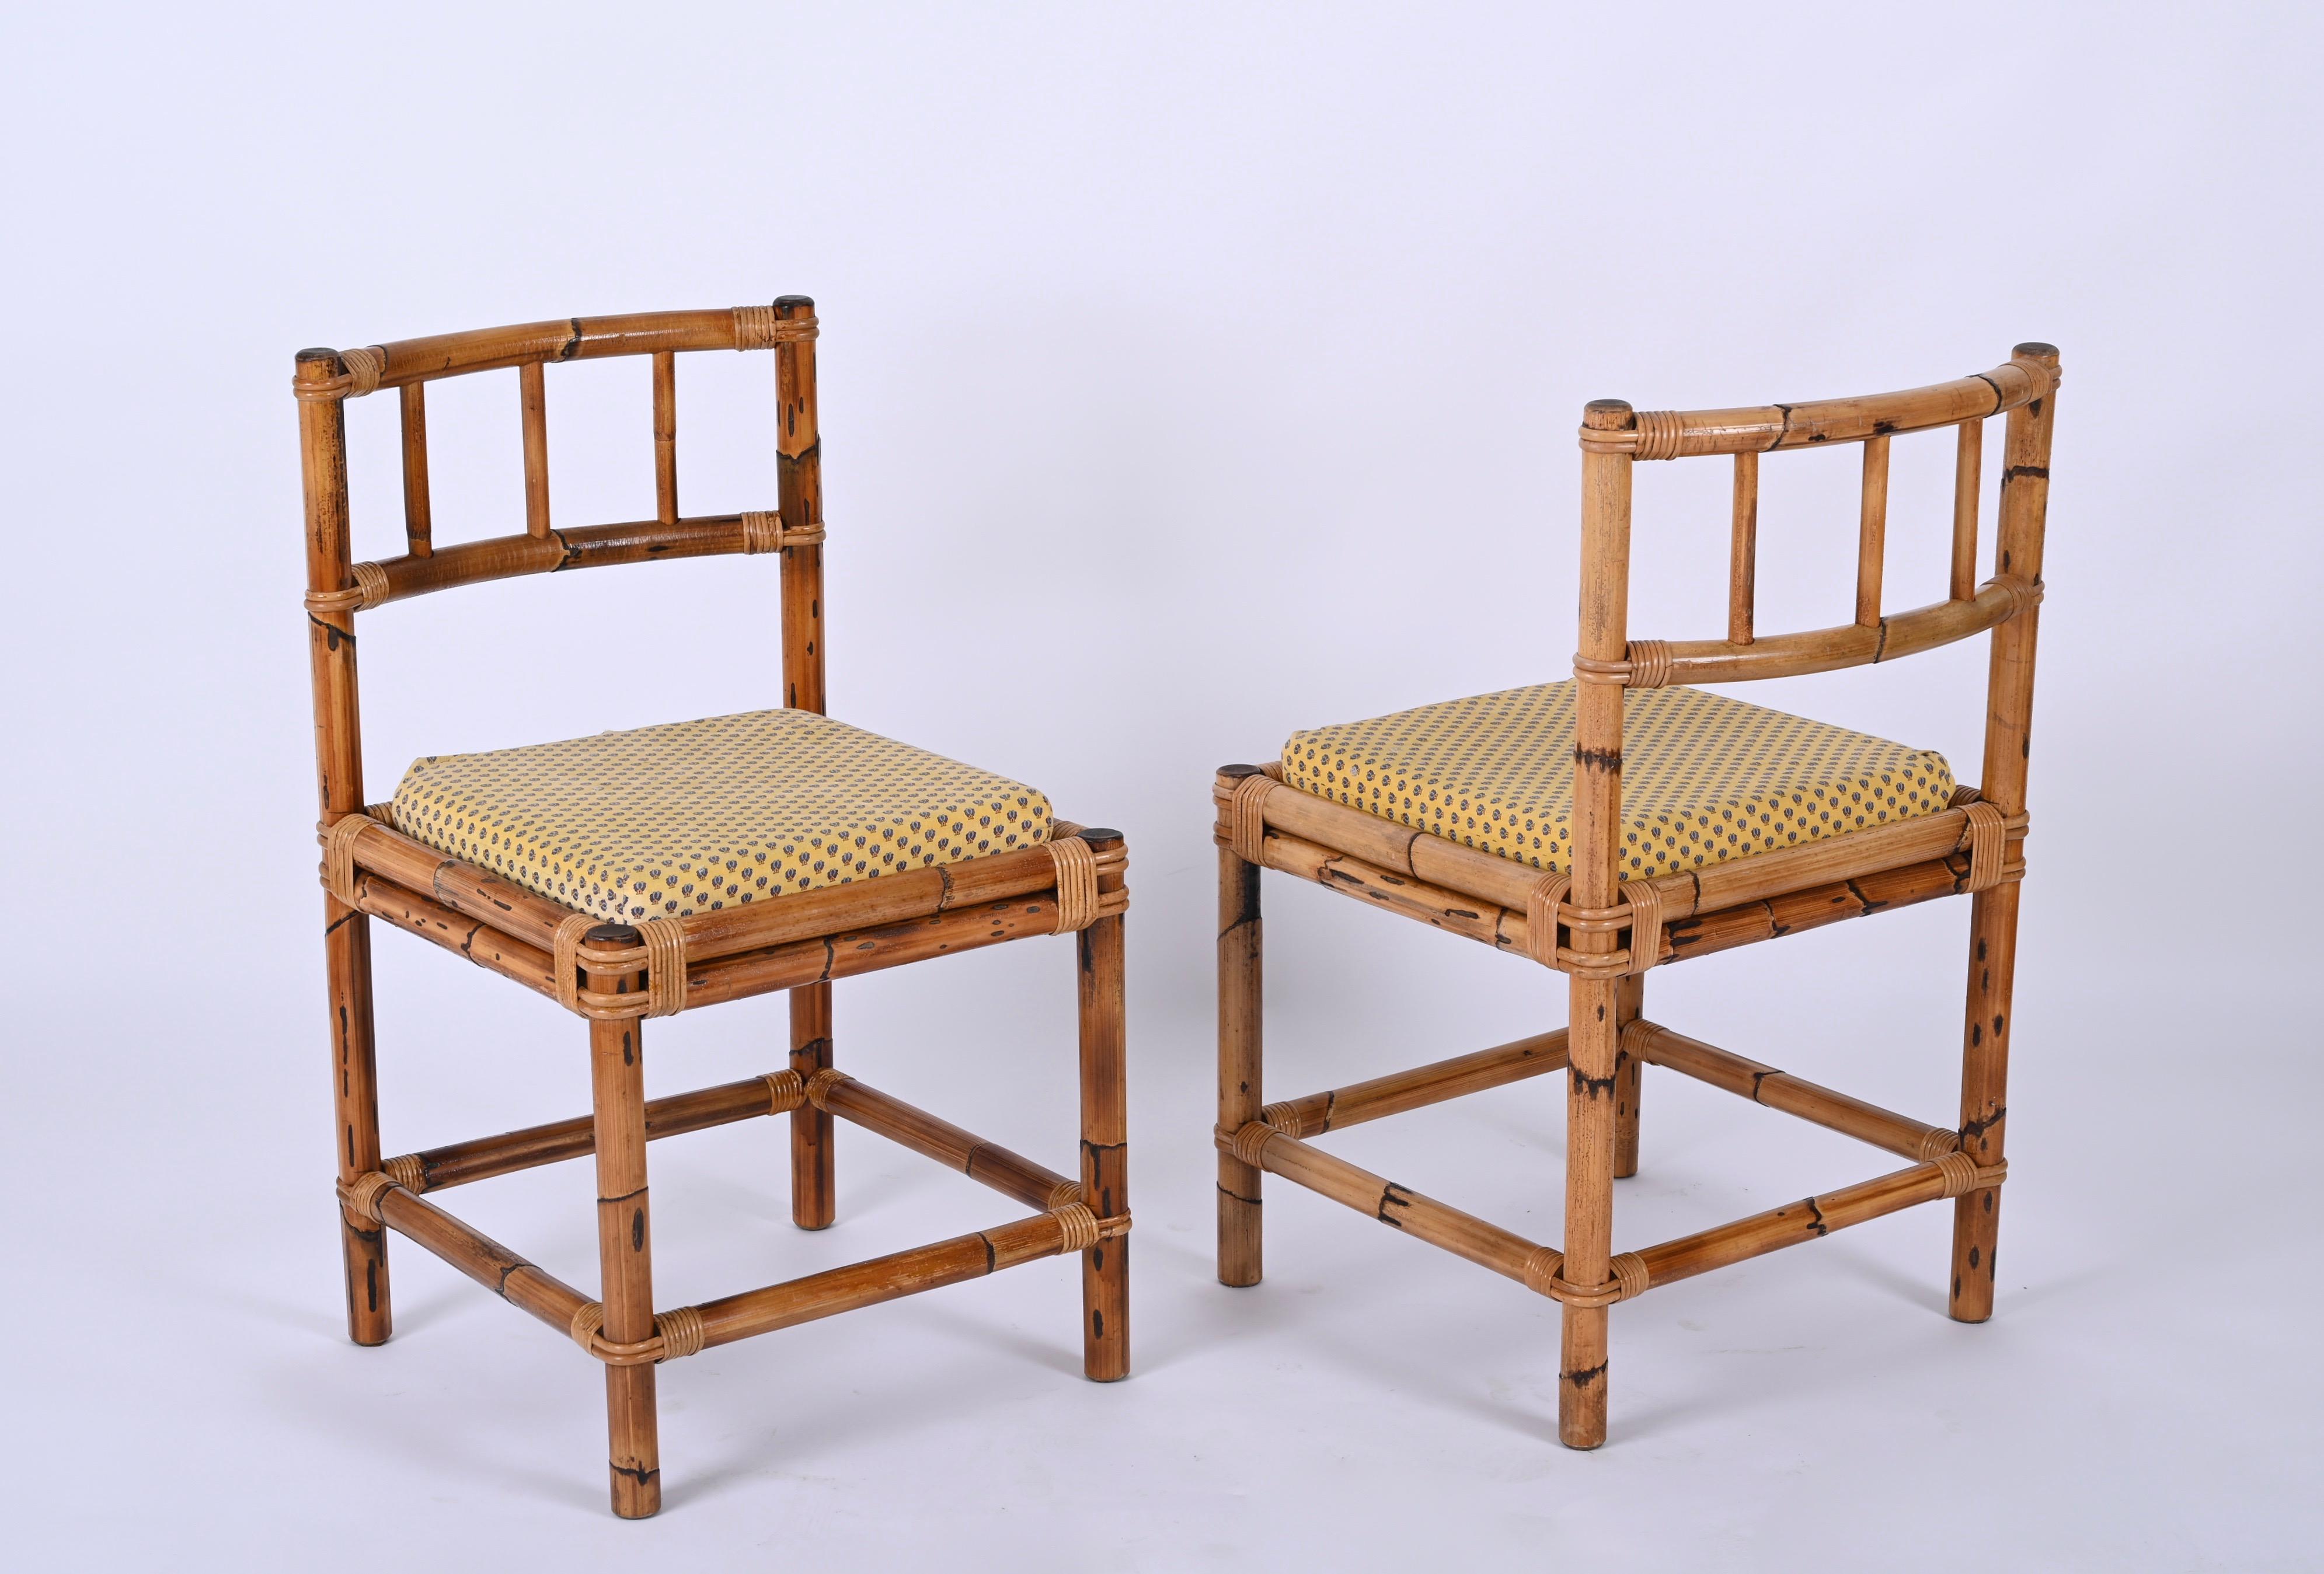 Fantastic pair of bamboo chairs, designed in Italy in the 1970s and attributed to Vivai del Sud.

These beautiful chairs are a wonderful example of Italian manufacture from the 70s, characterized by a very solid bamboo structure and splendid